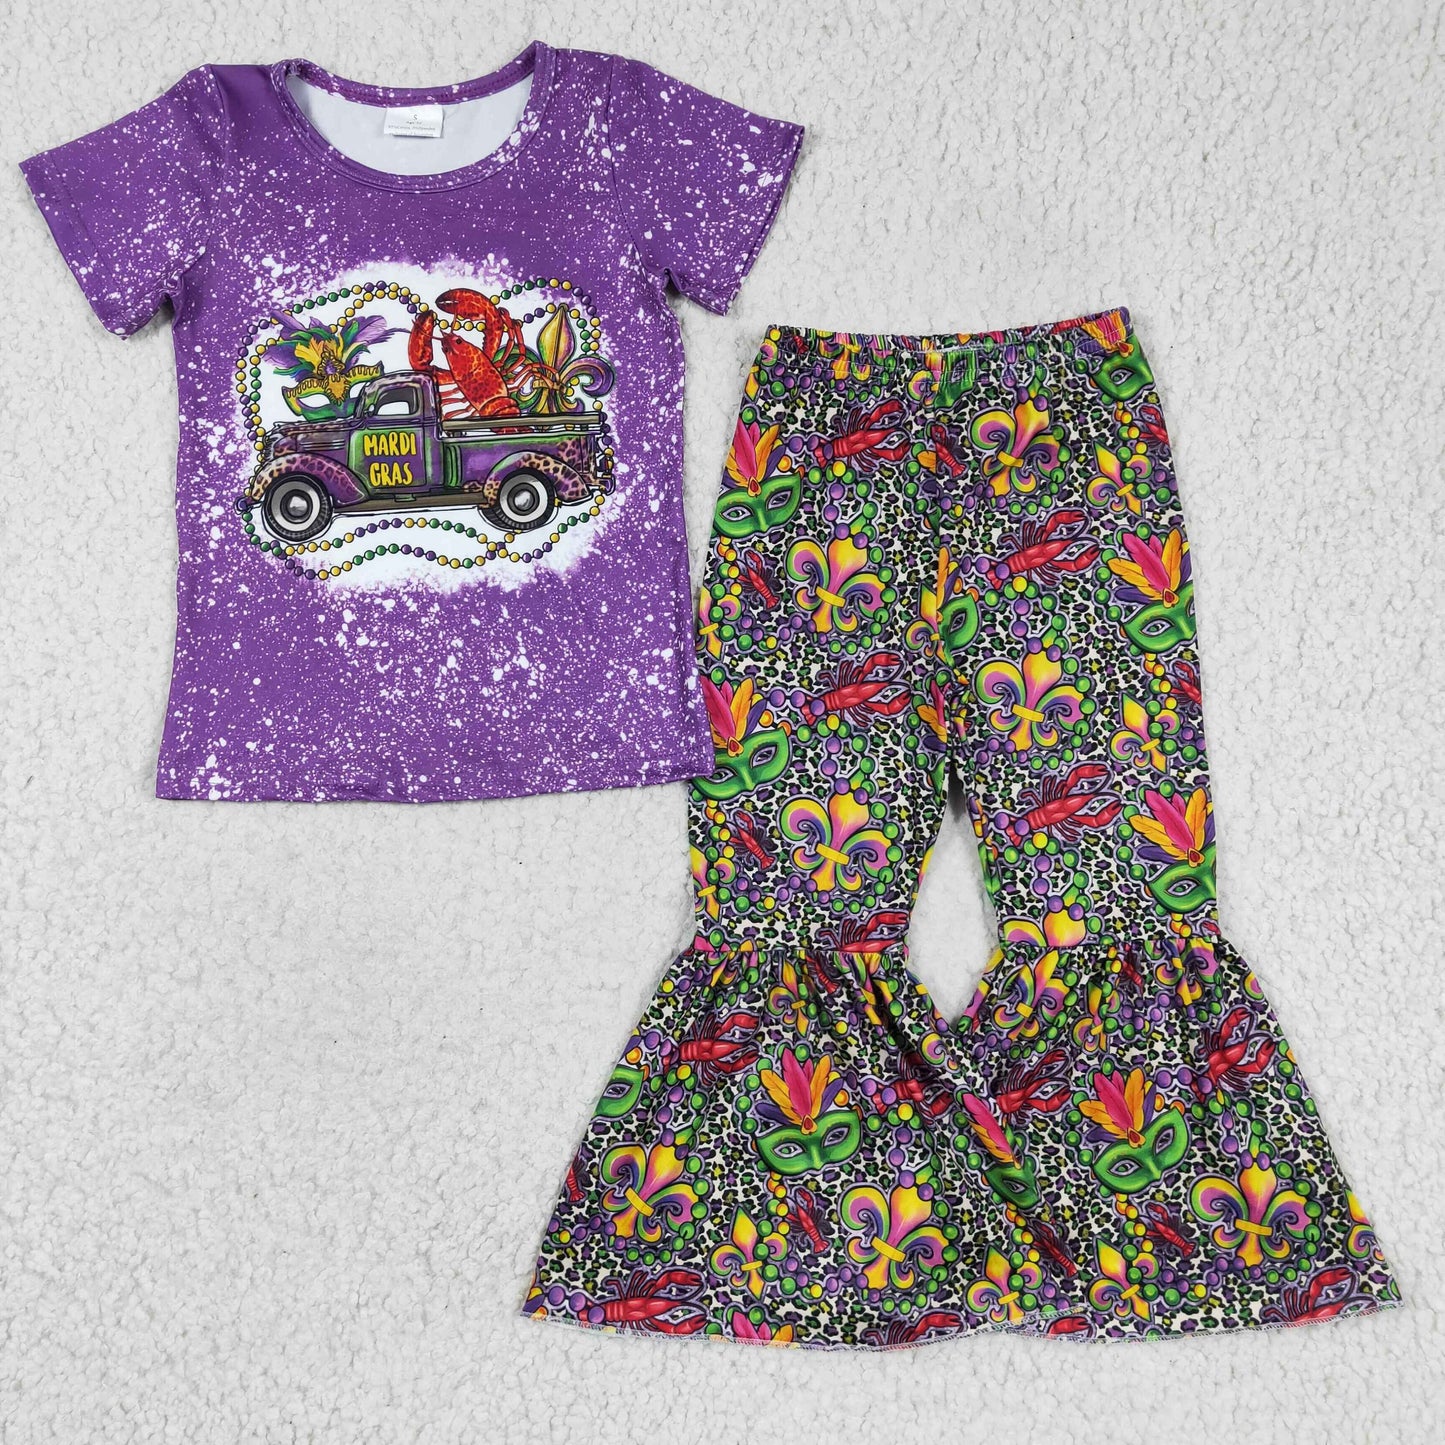 Girls Maidi Gras bell pants outfit GSPO0268 – baby skirts